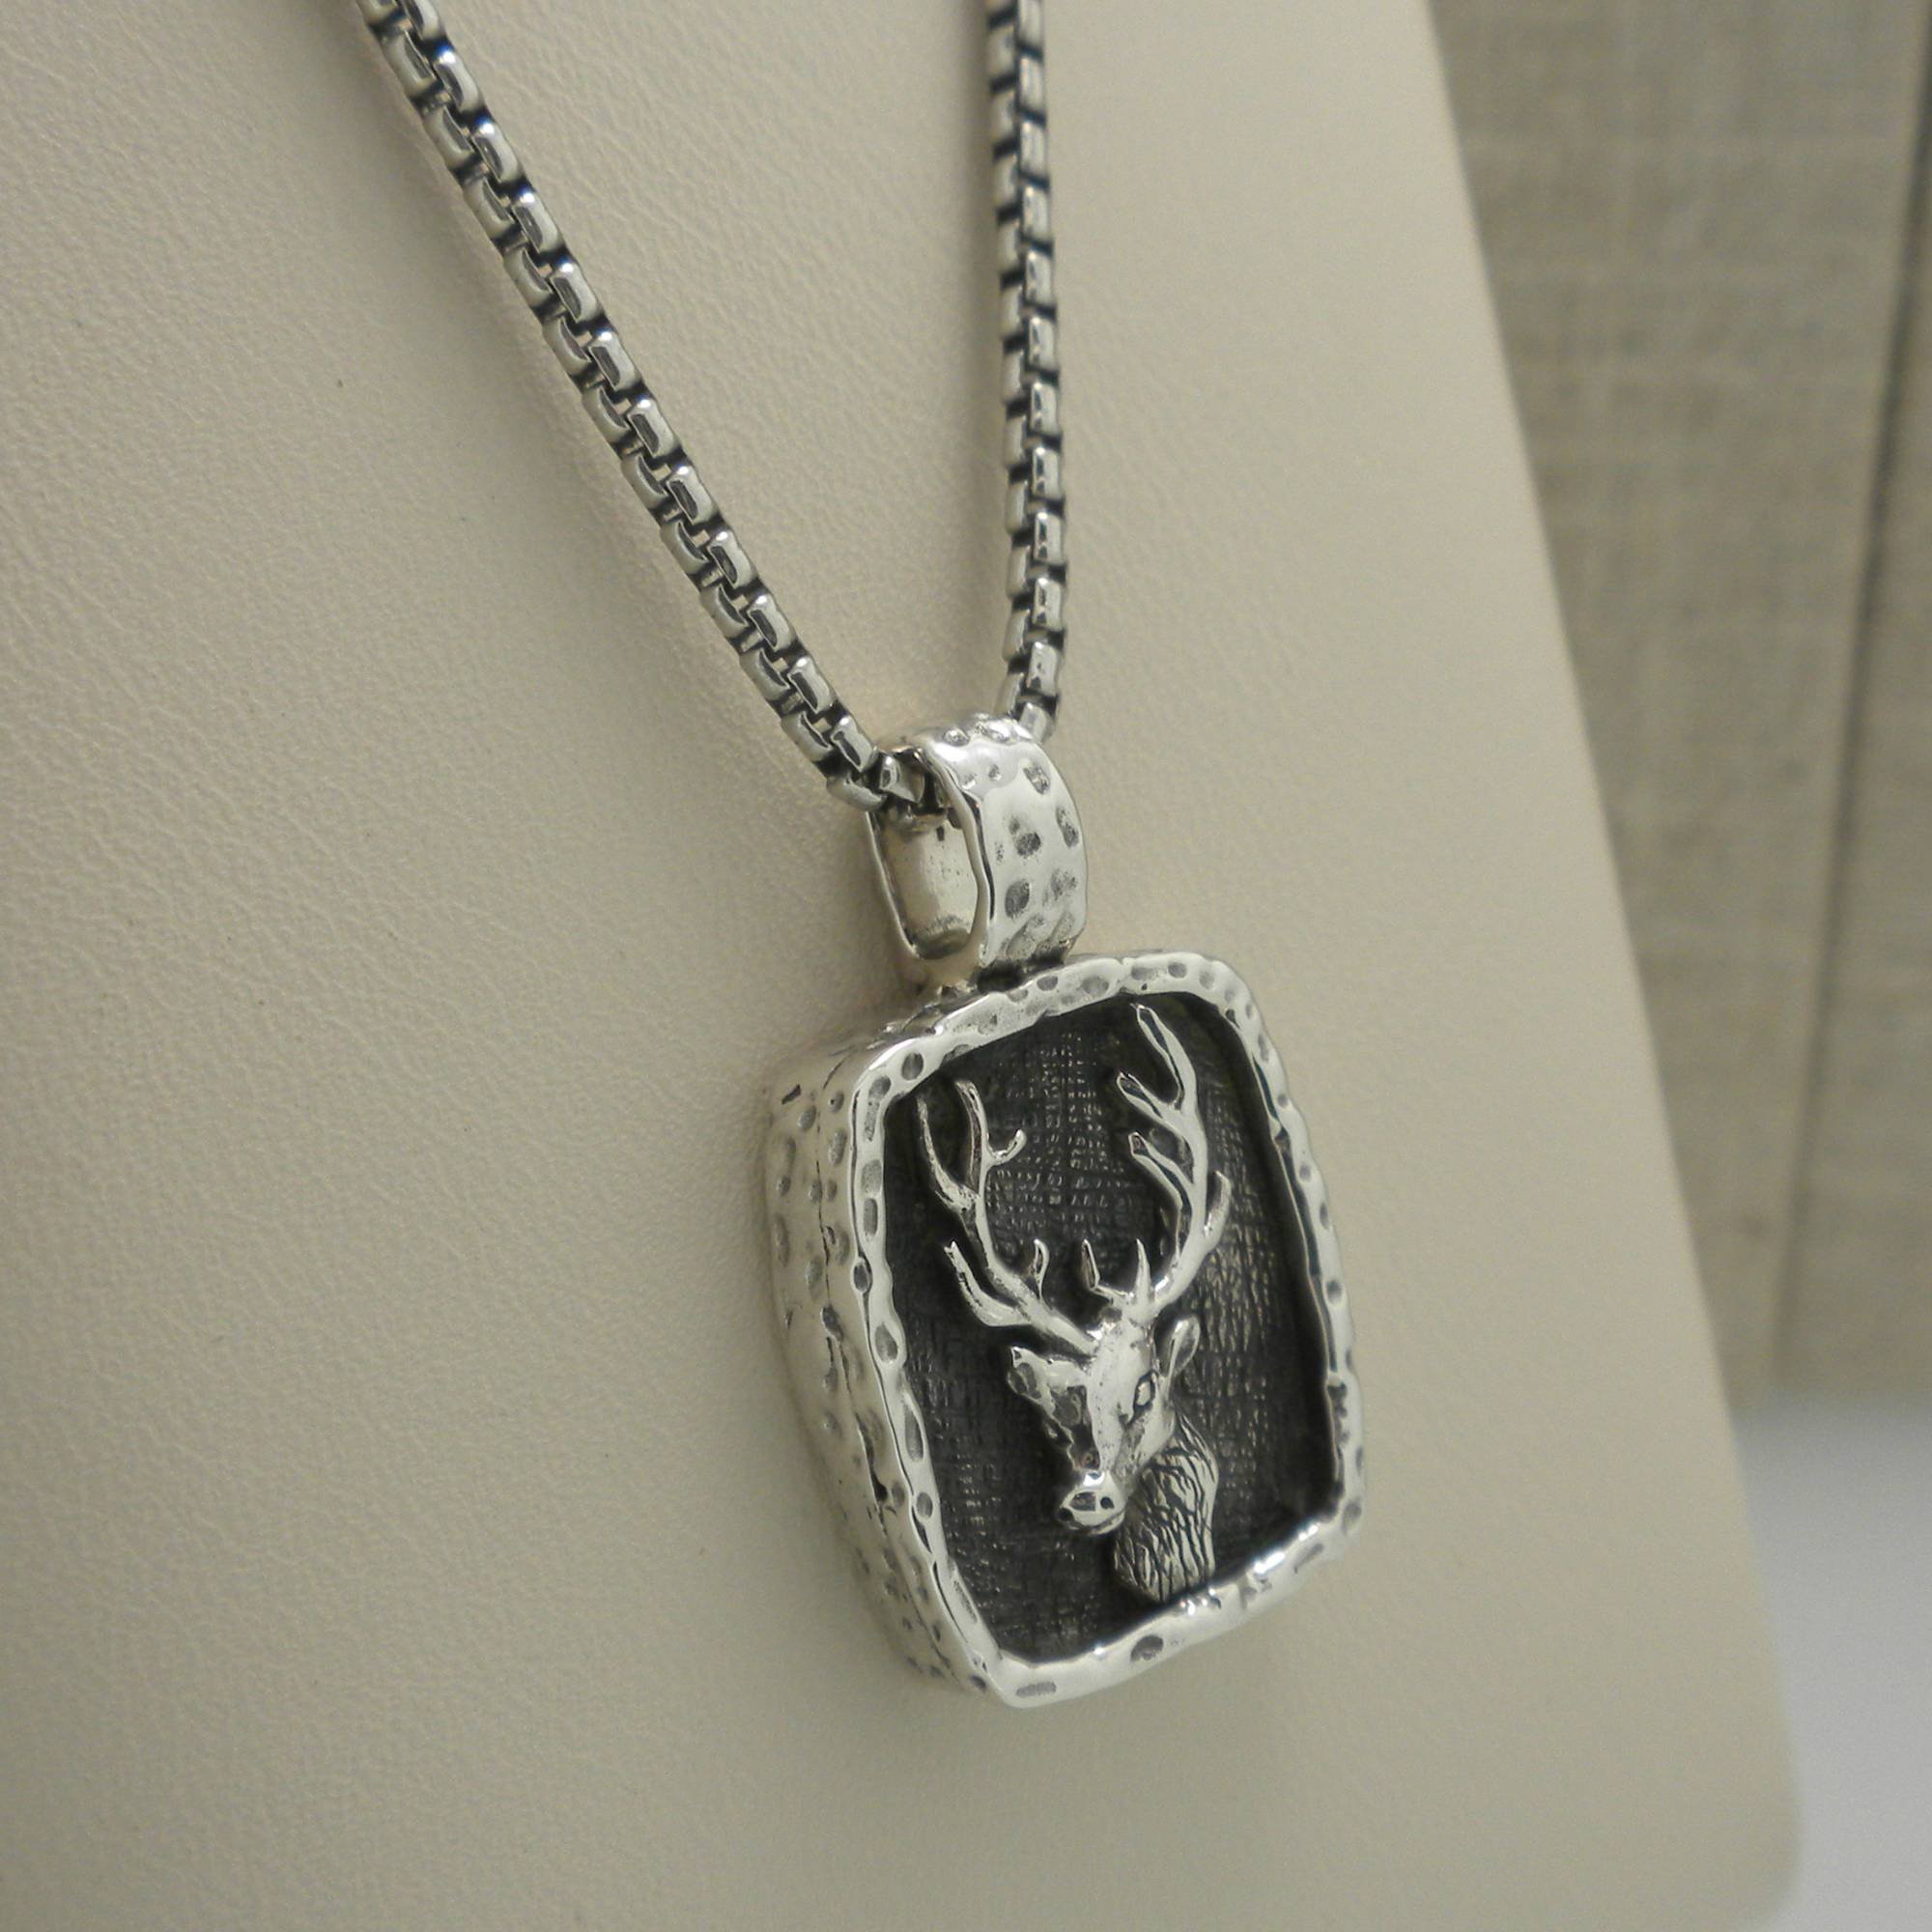 Stag Pendant by Keith Jack